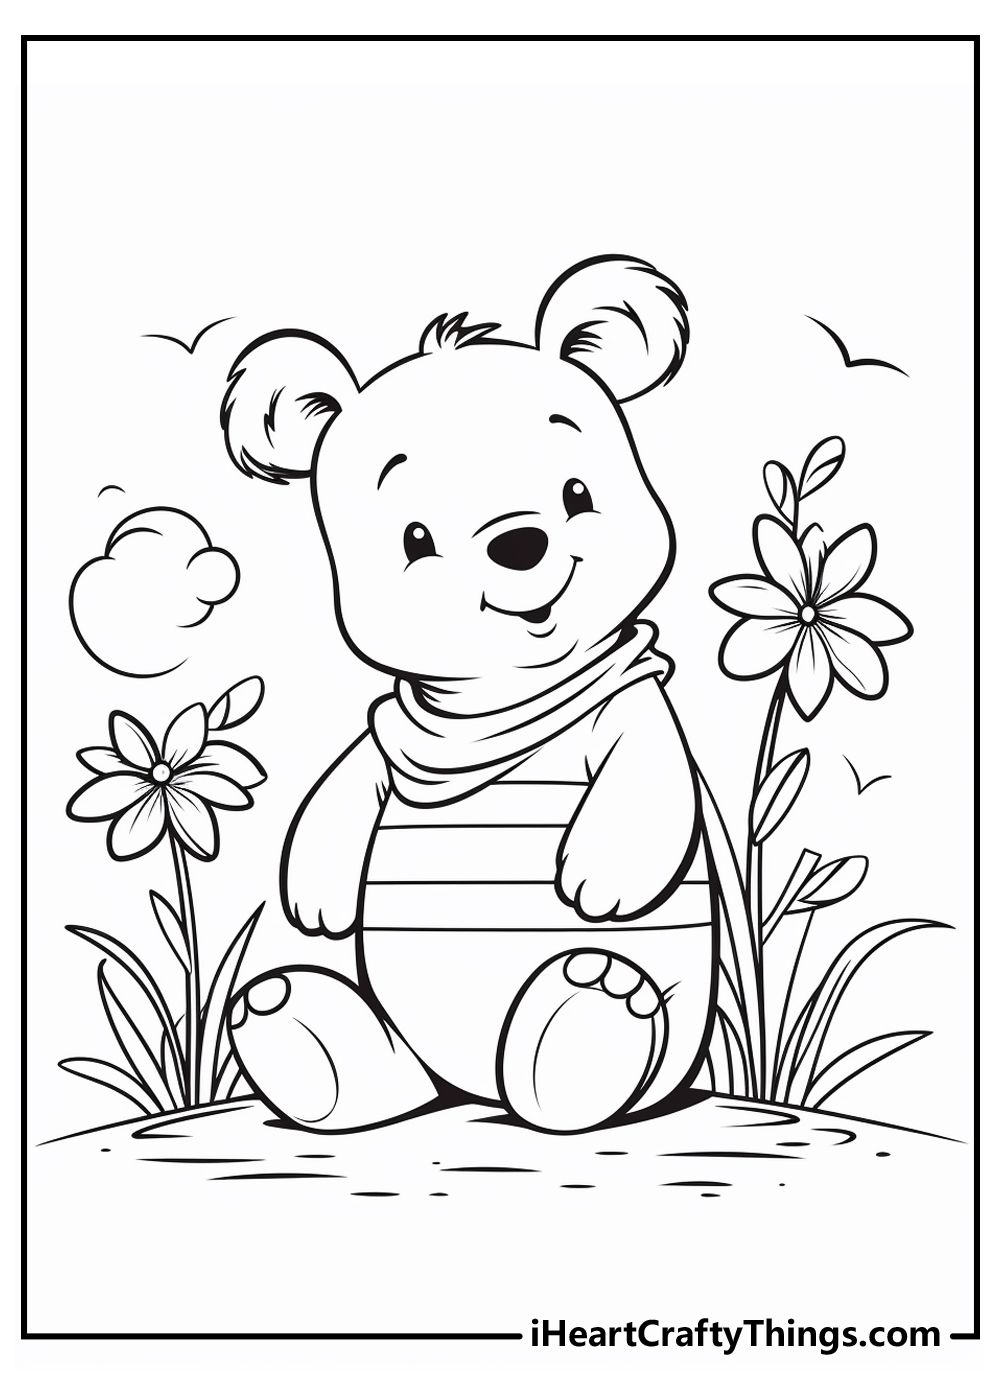 Winnie the pooh coloring pages free printables